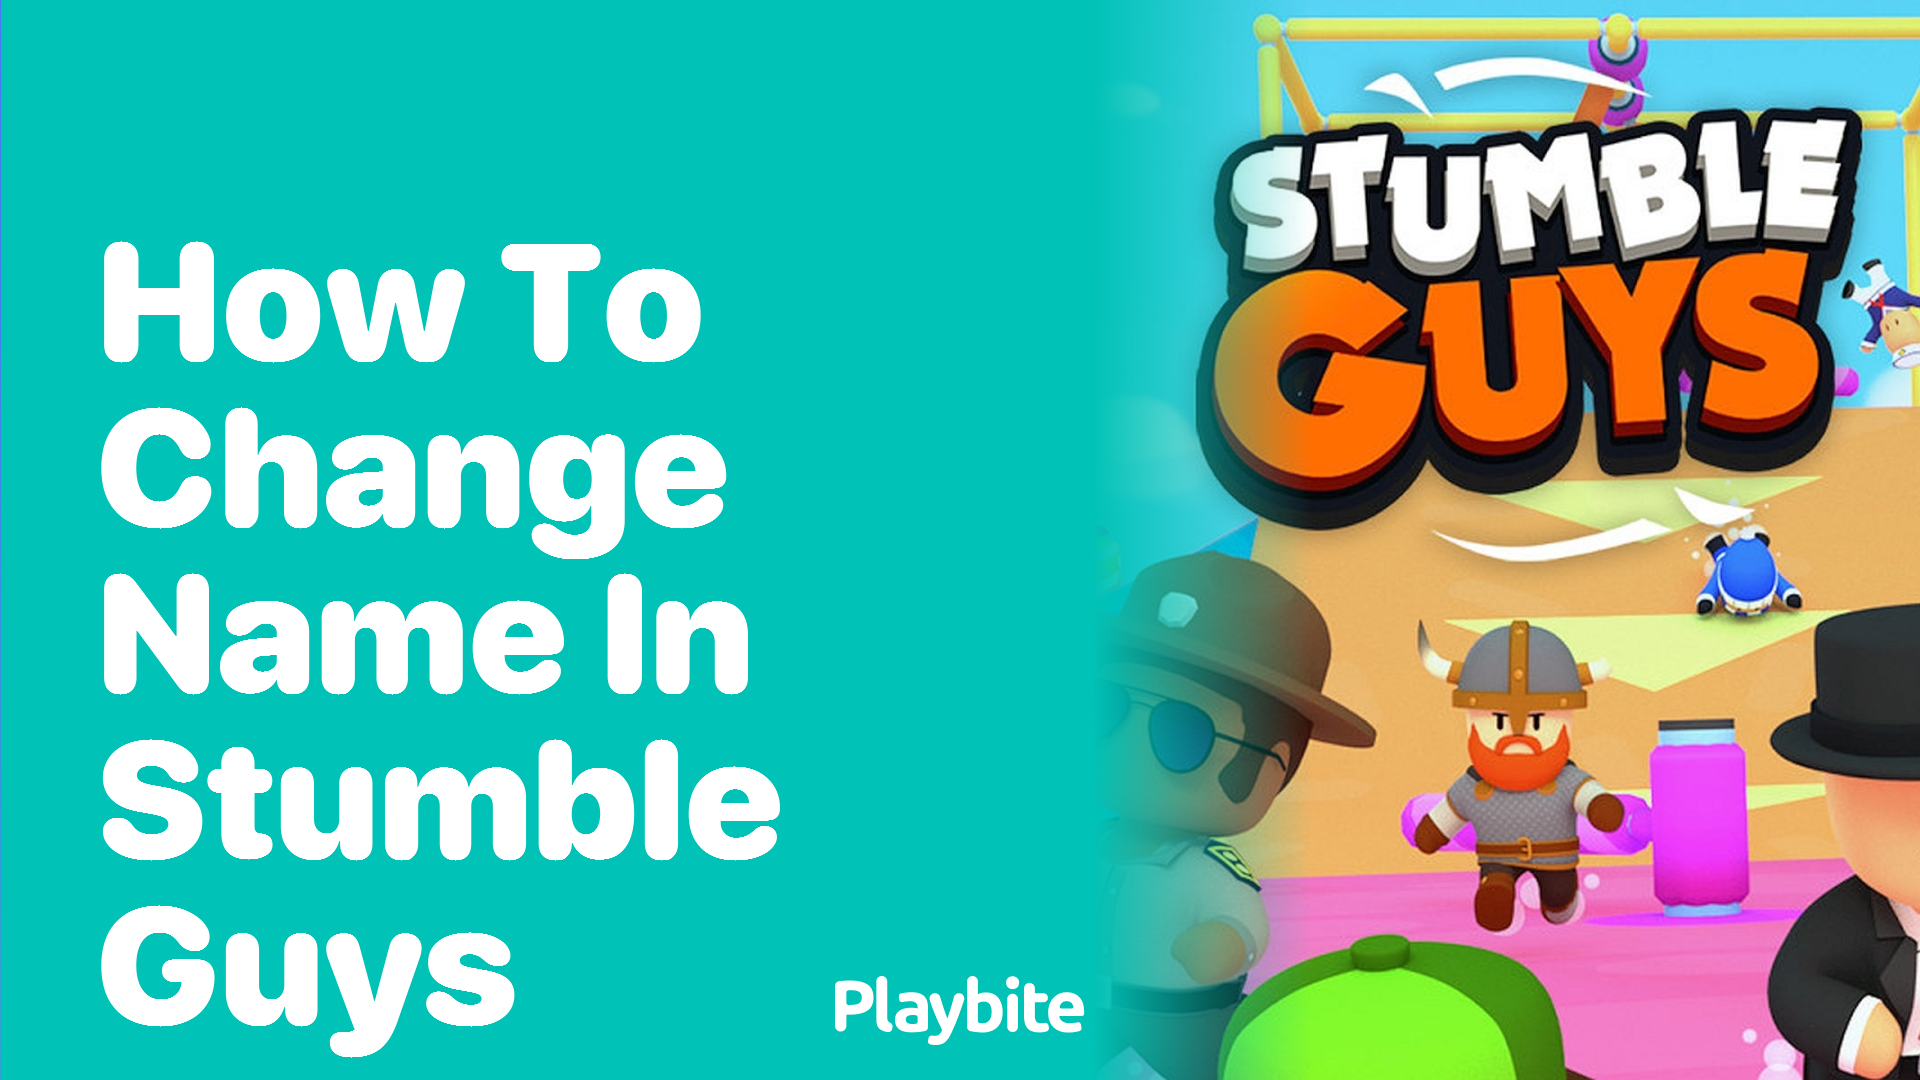 How to Change Your Name in Stumble Guys